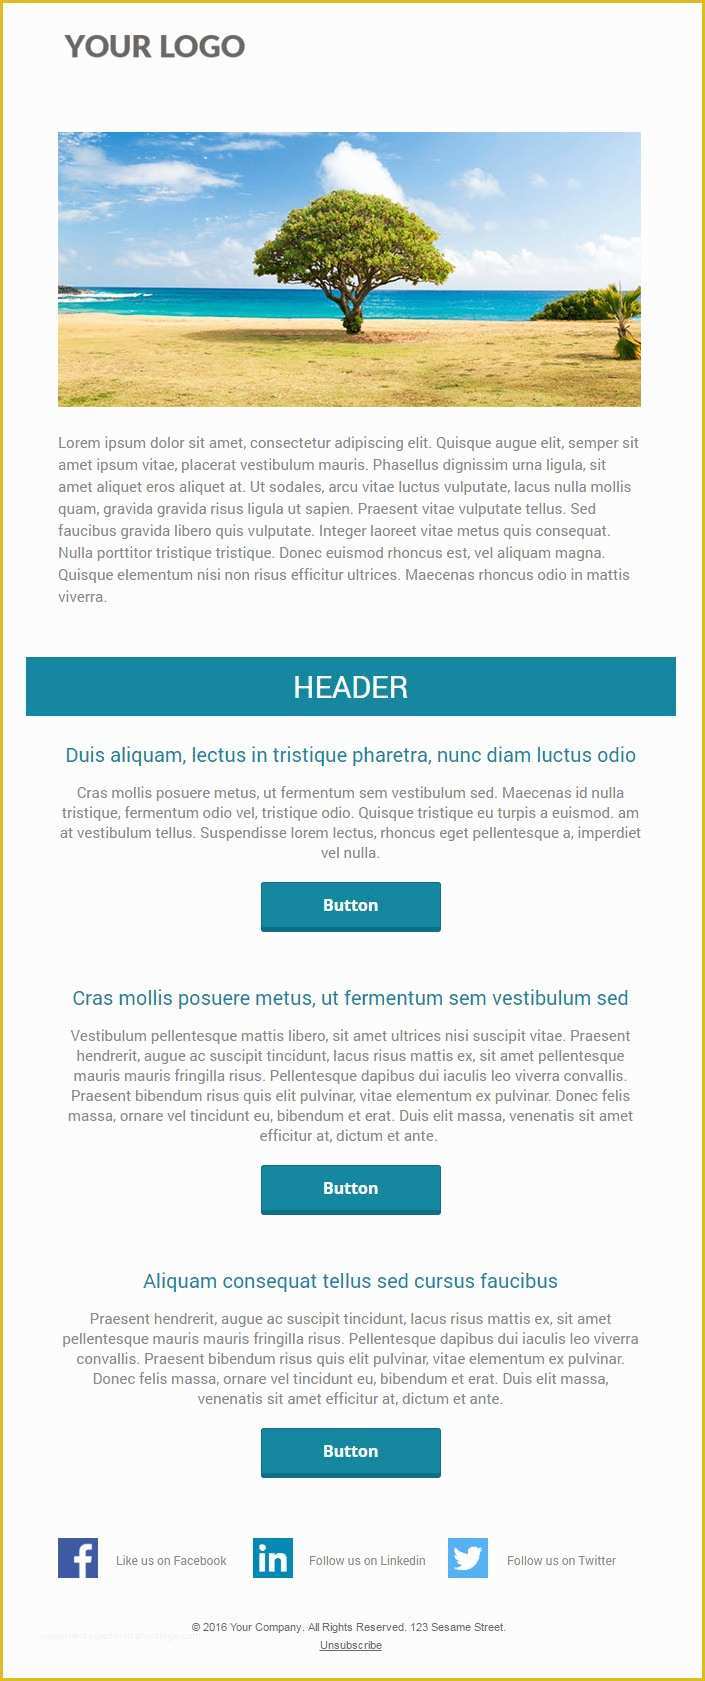 Free Convertkit Email Template Of 6 Free Responsive Marketo Email Templates